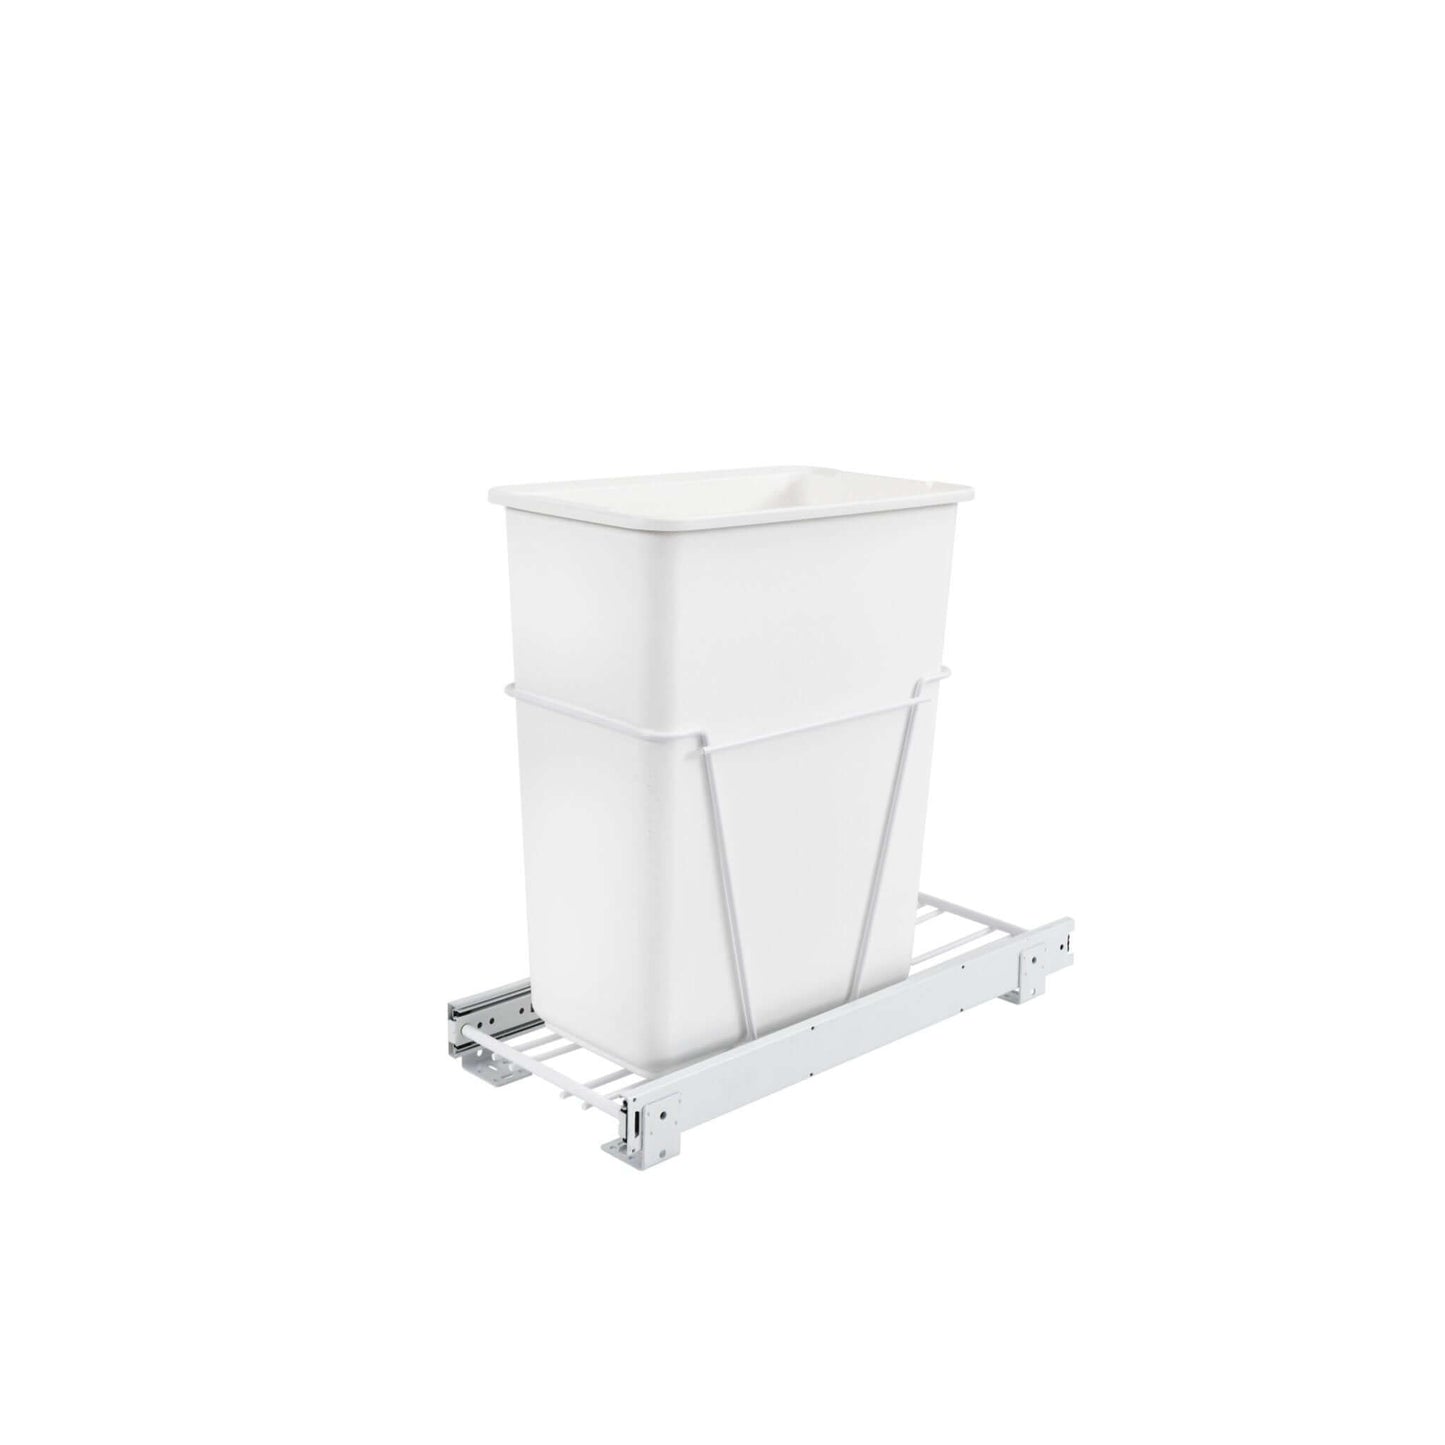 Rev-A-Shelf - White Steel Pull Out Waste/Trash Container - RV-9PB